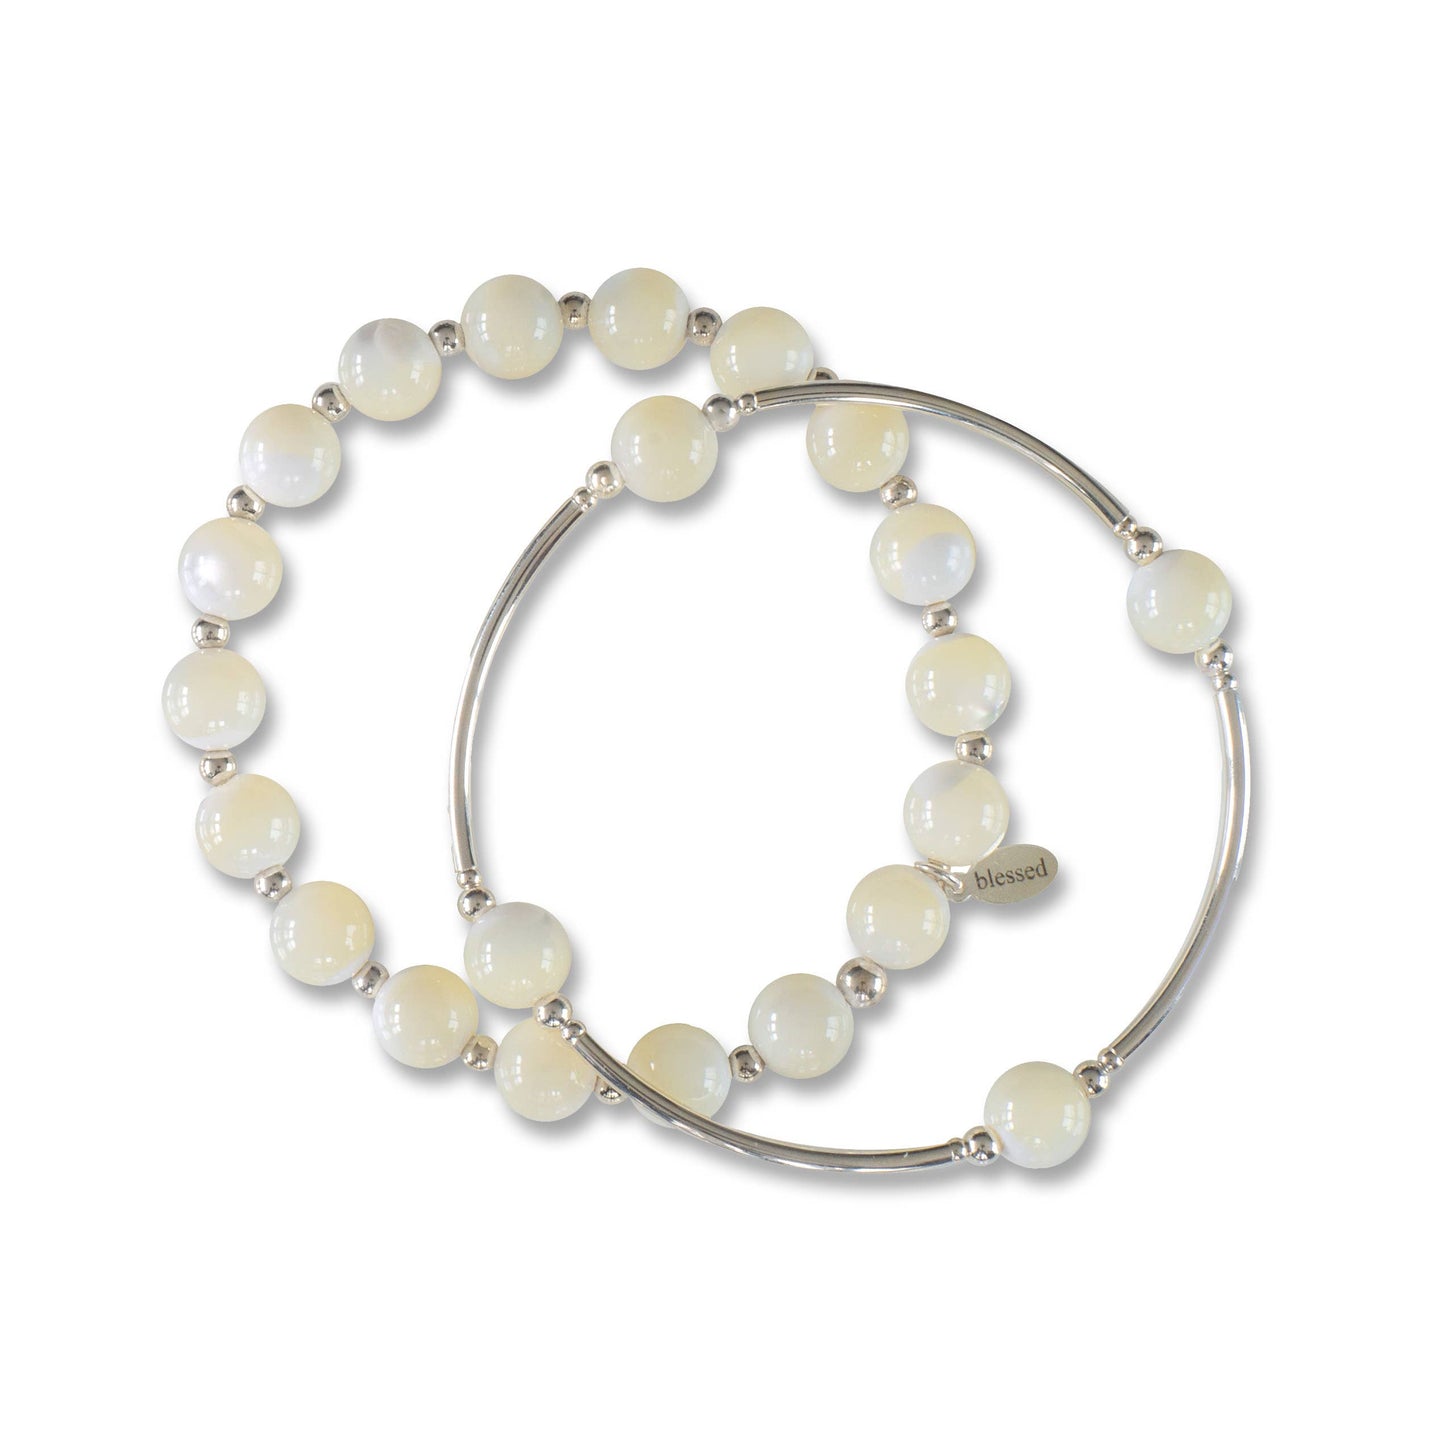 Count Your Blessings Bracelet in Mother of Pearl: L